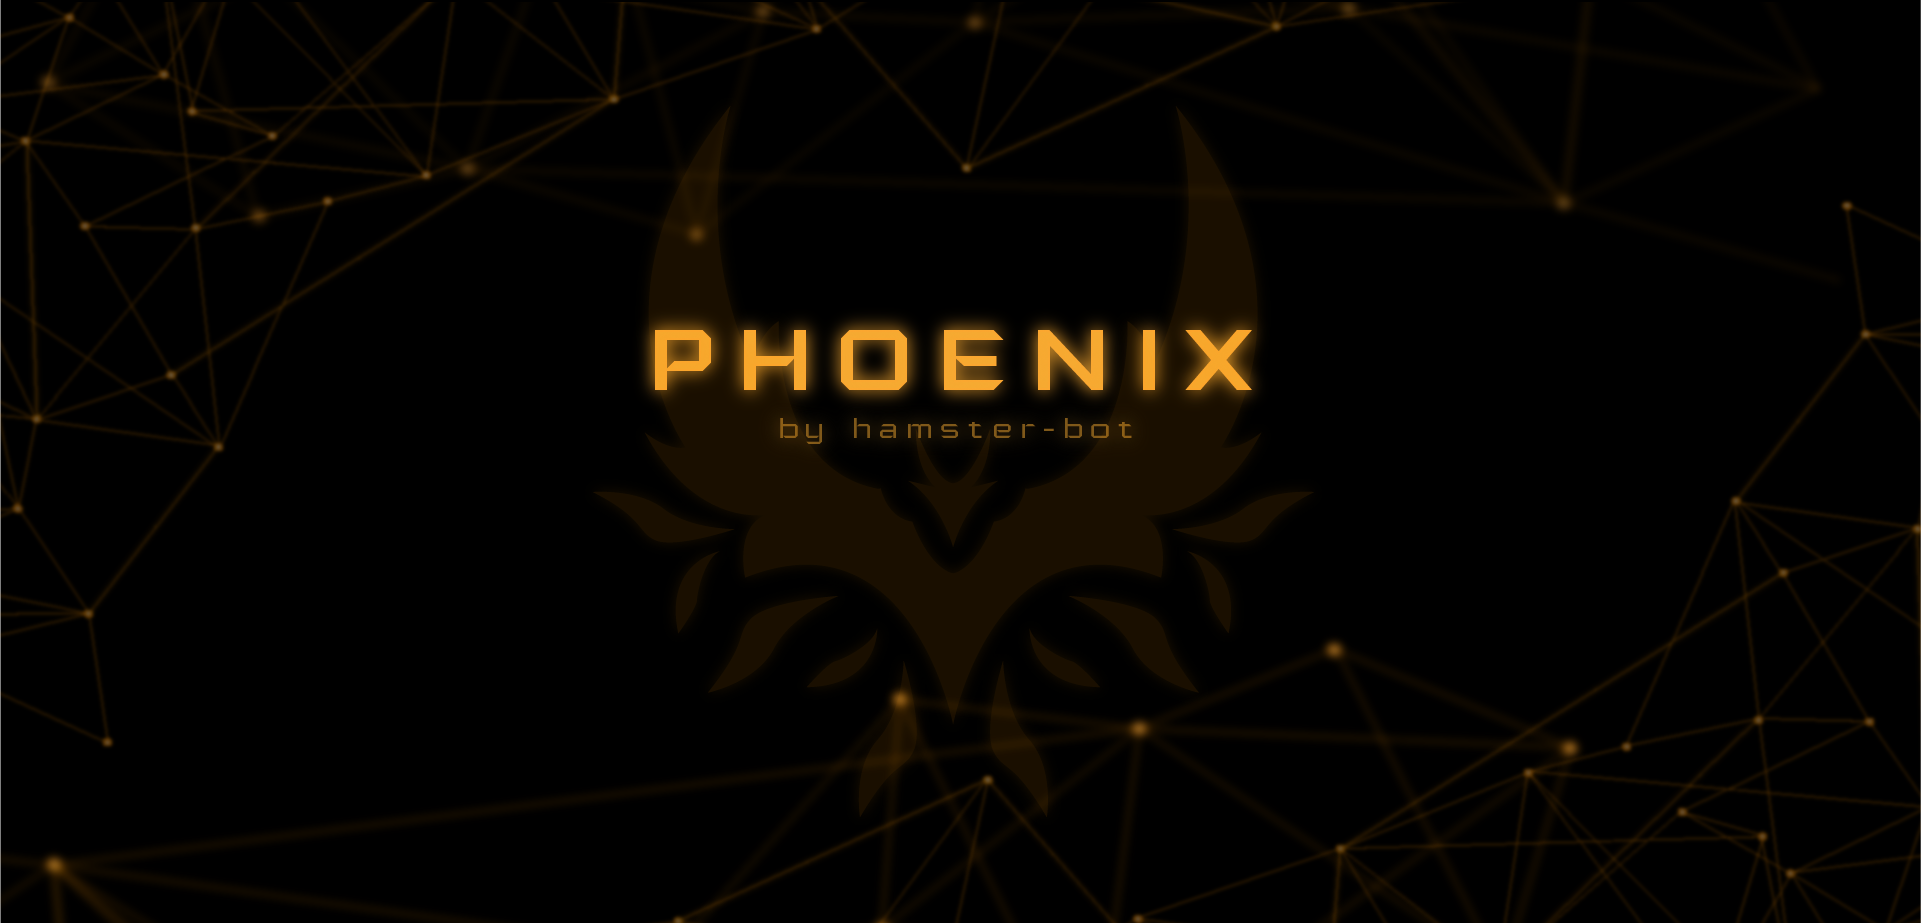 PHOENIX's Second Annual Report by hamster-bot